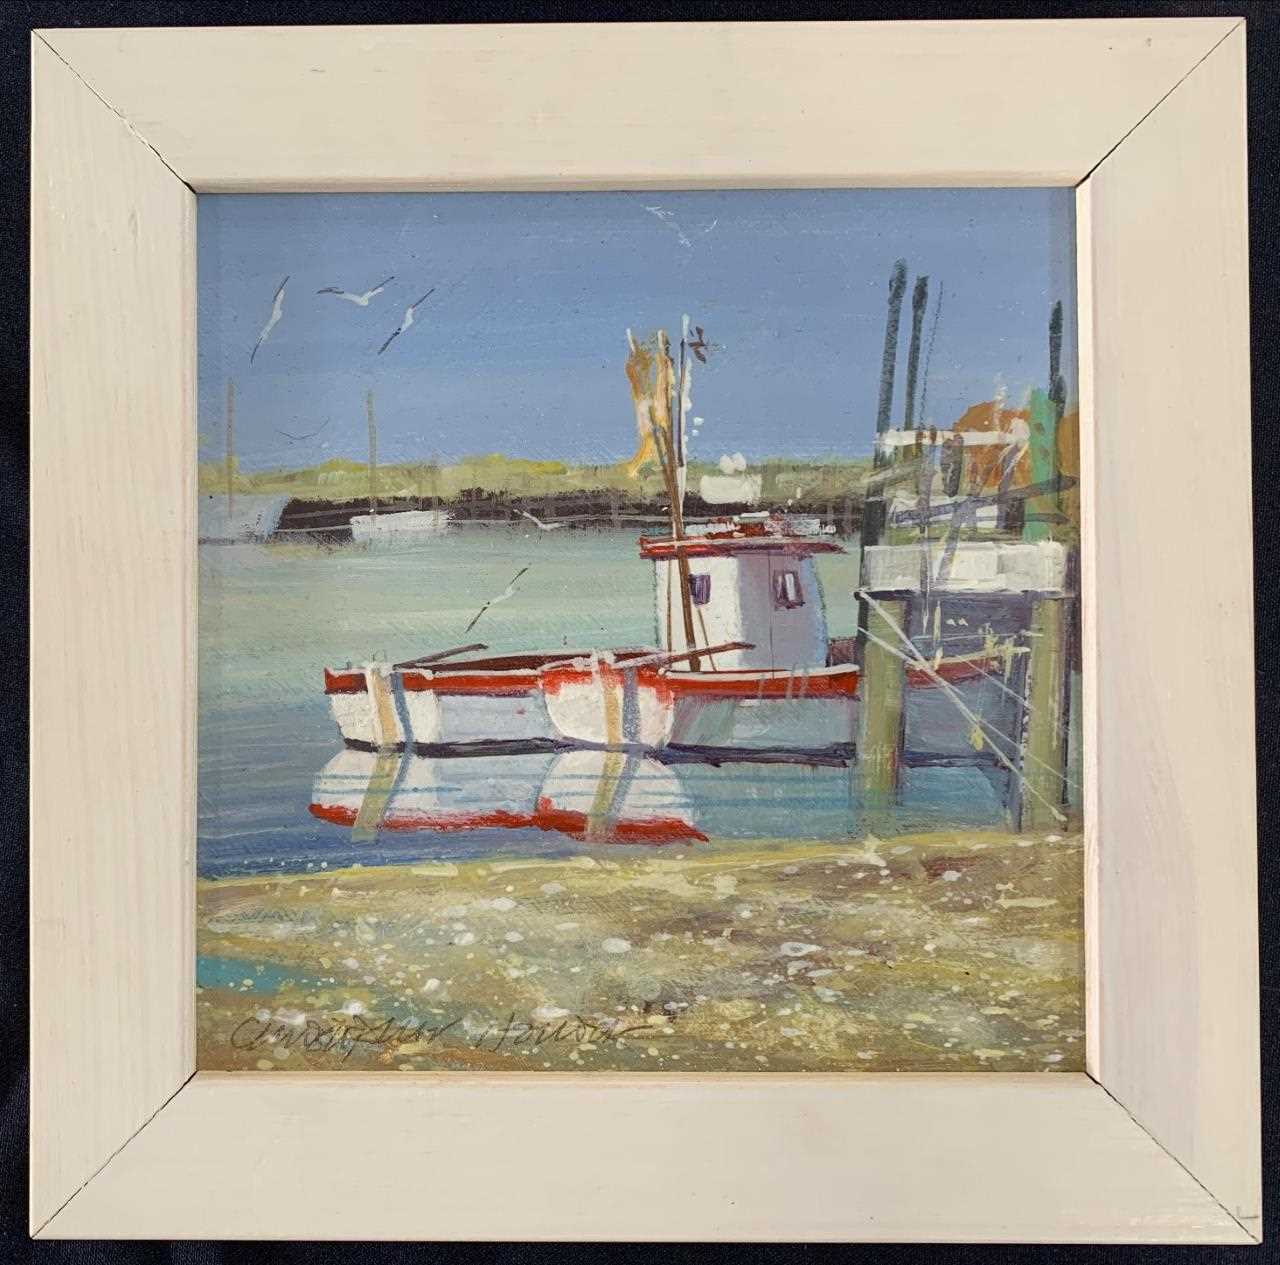 Christopher Hollick (British, contemporary), "Southwold Harbour", oil on board, signed, 6.5x6.